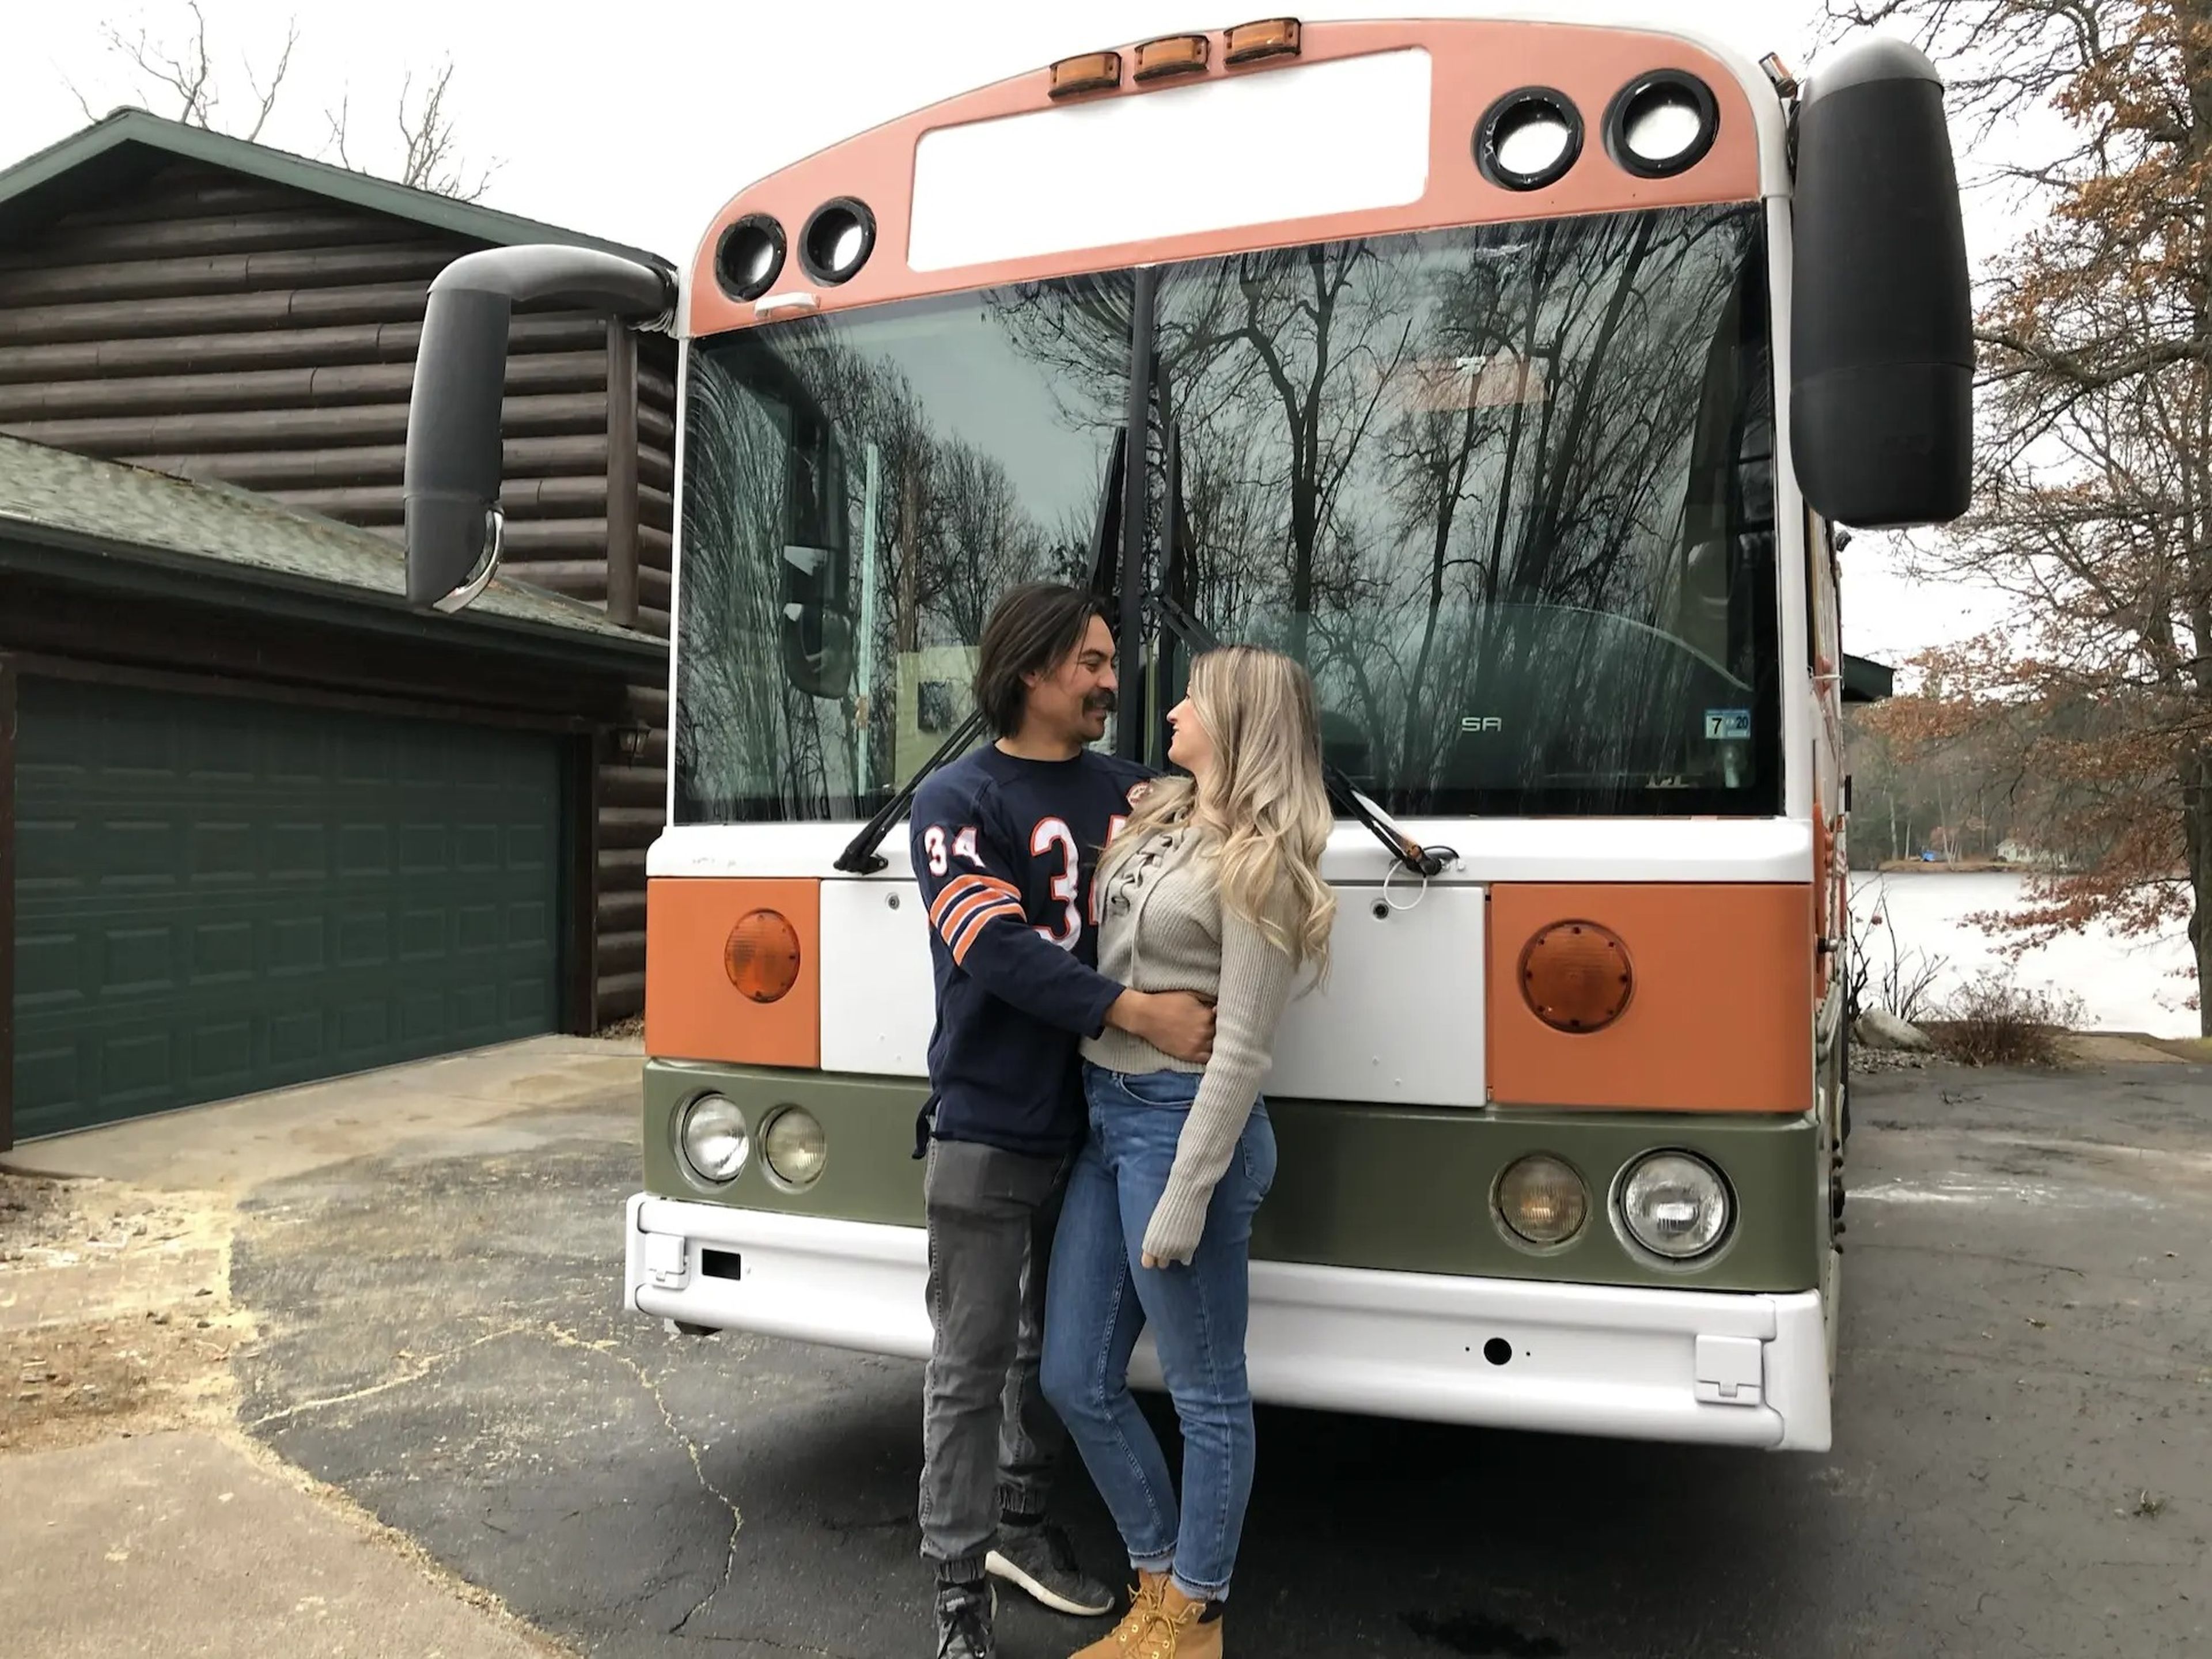 The couple posing outside of the painted orange-and-white school bus